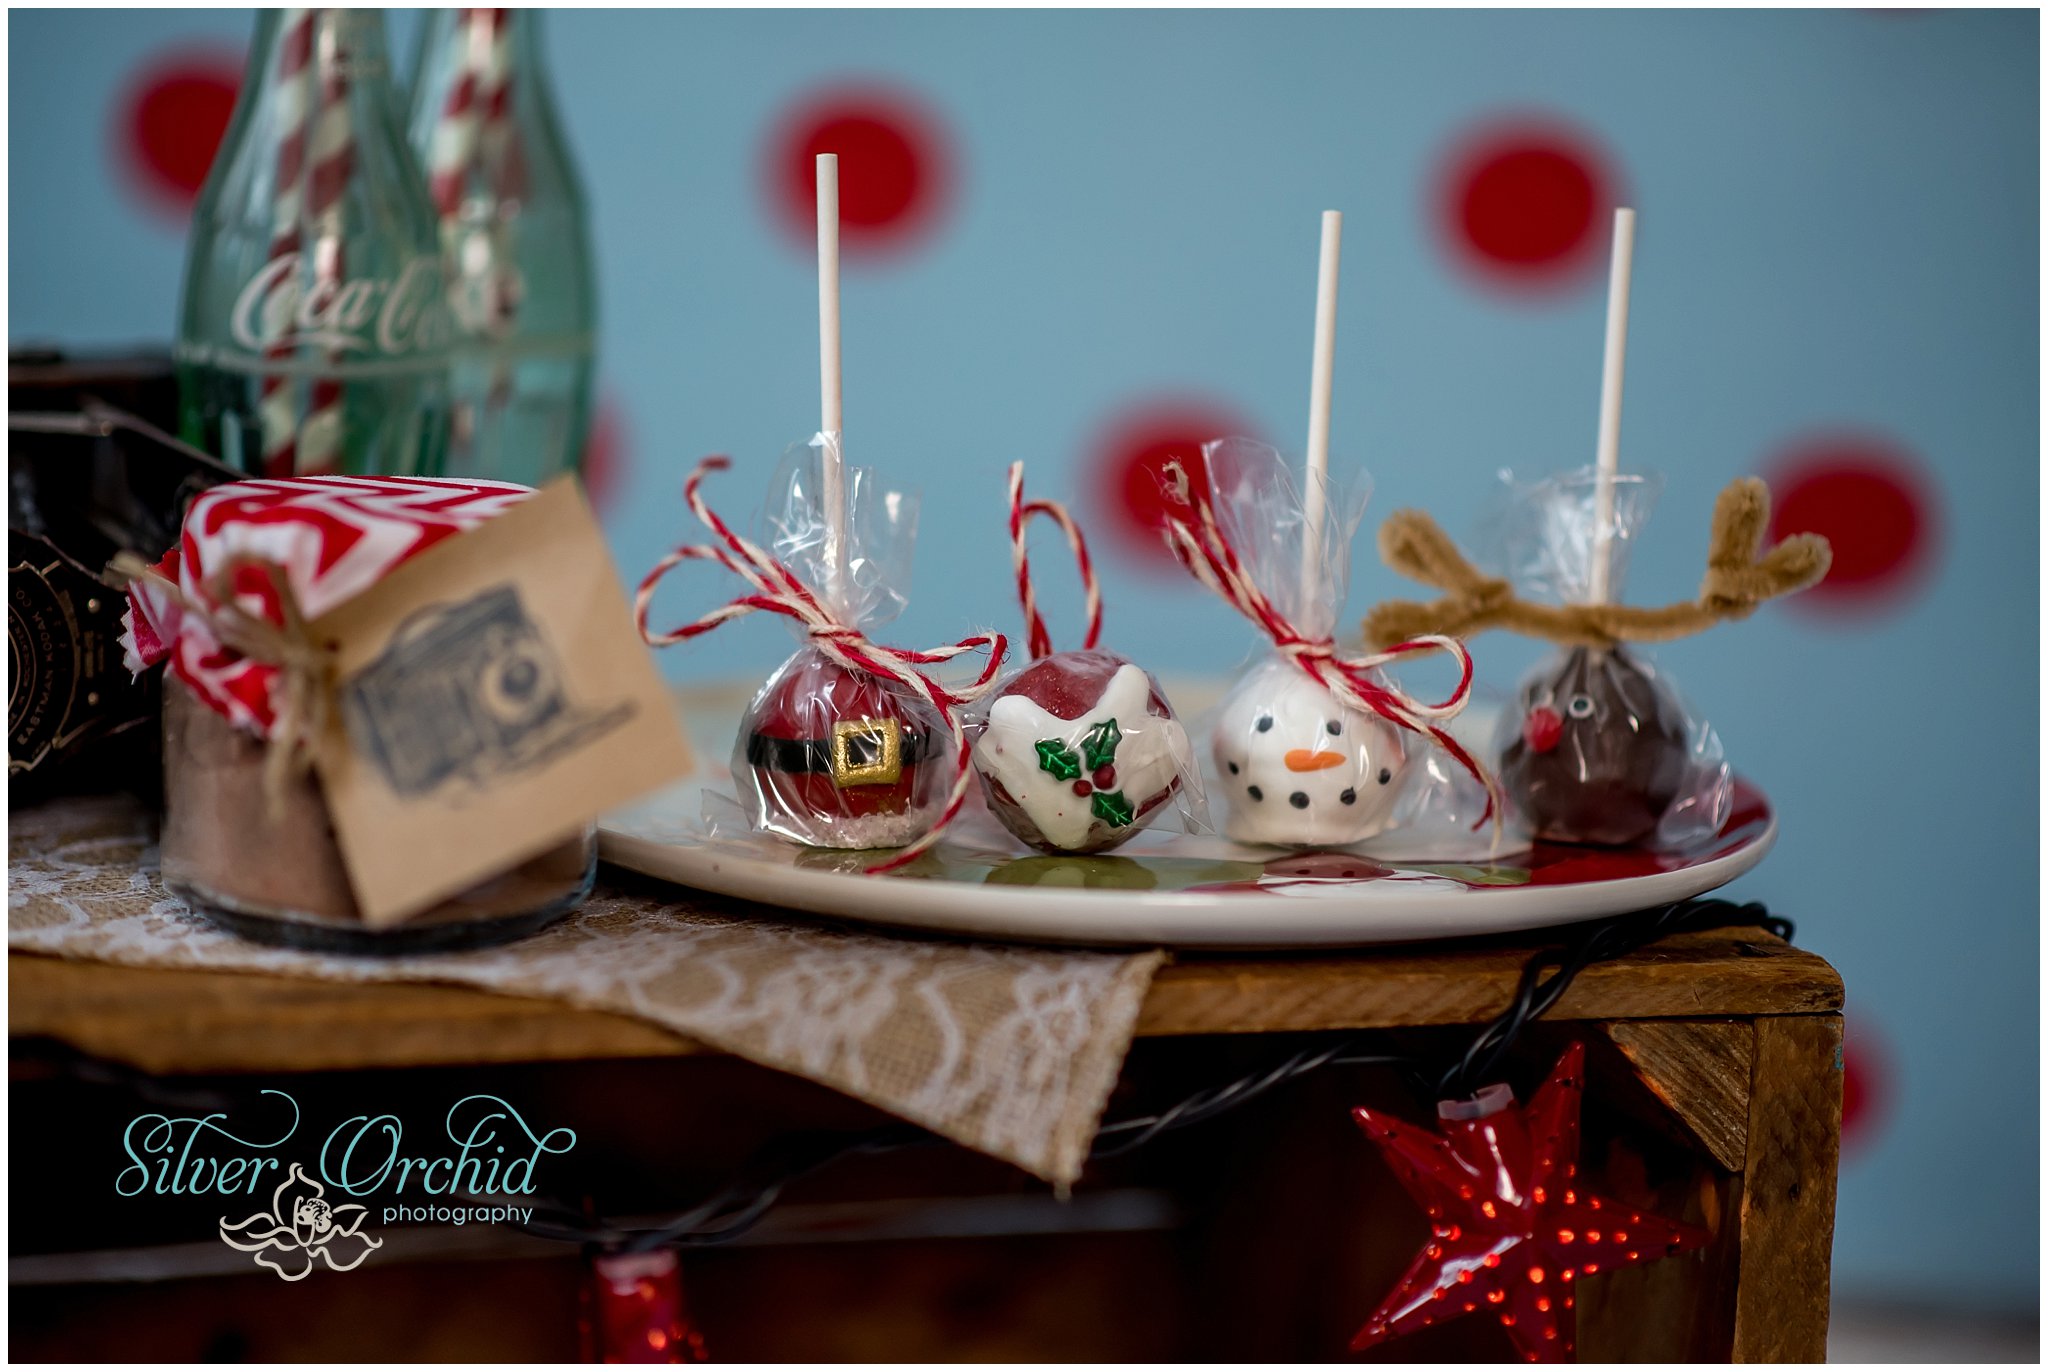 ©Silver Orchid Photography_holiday_silverorchidphotography.com_0017.jpg